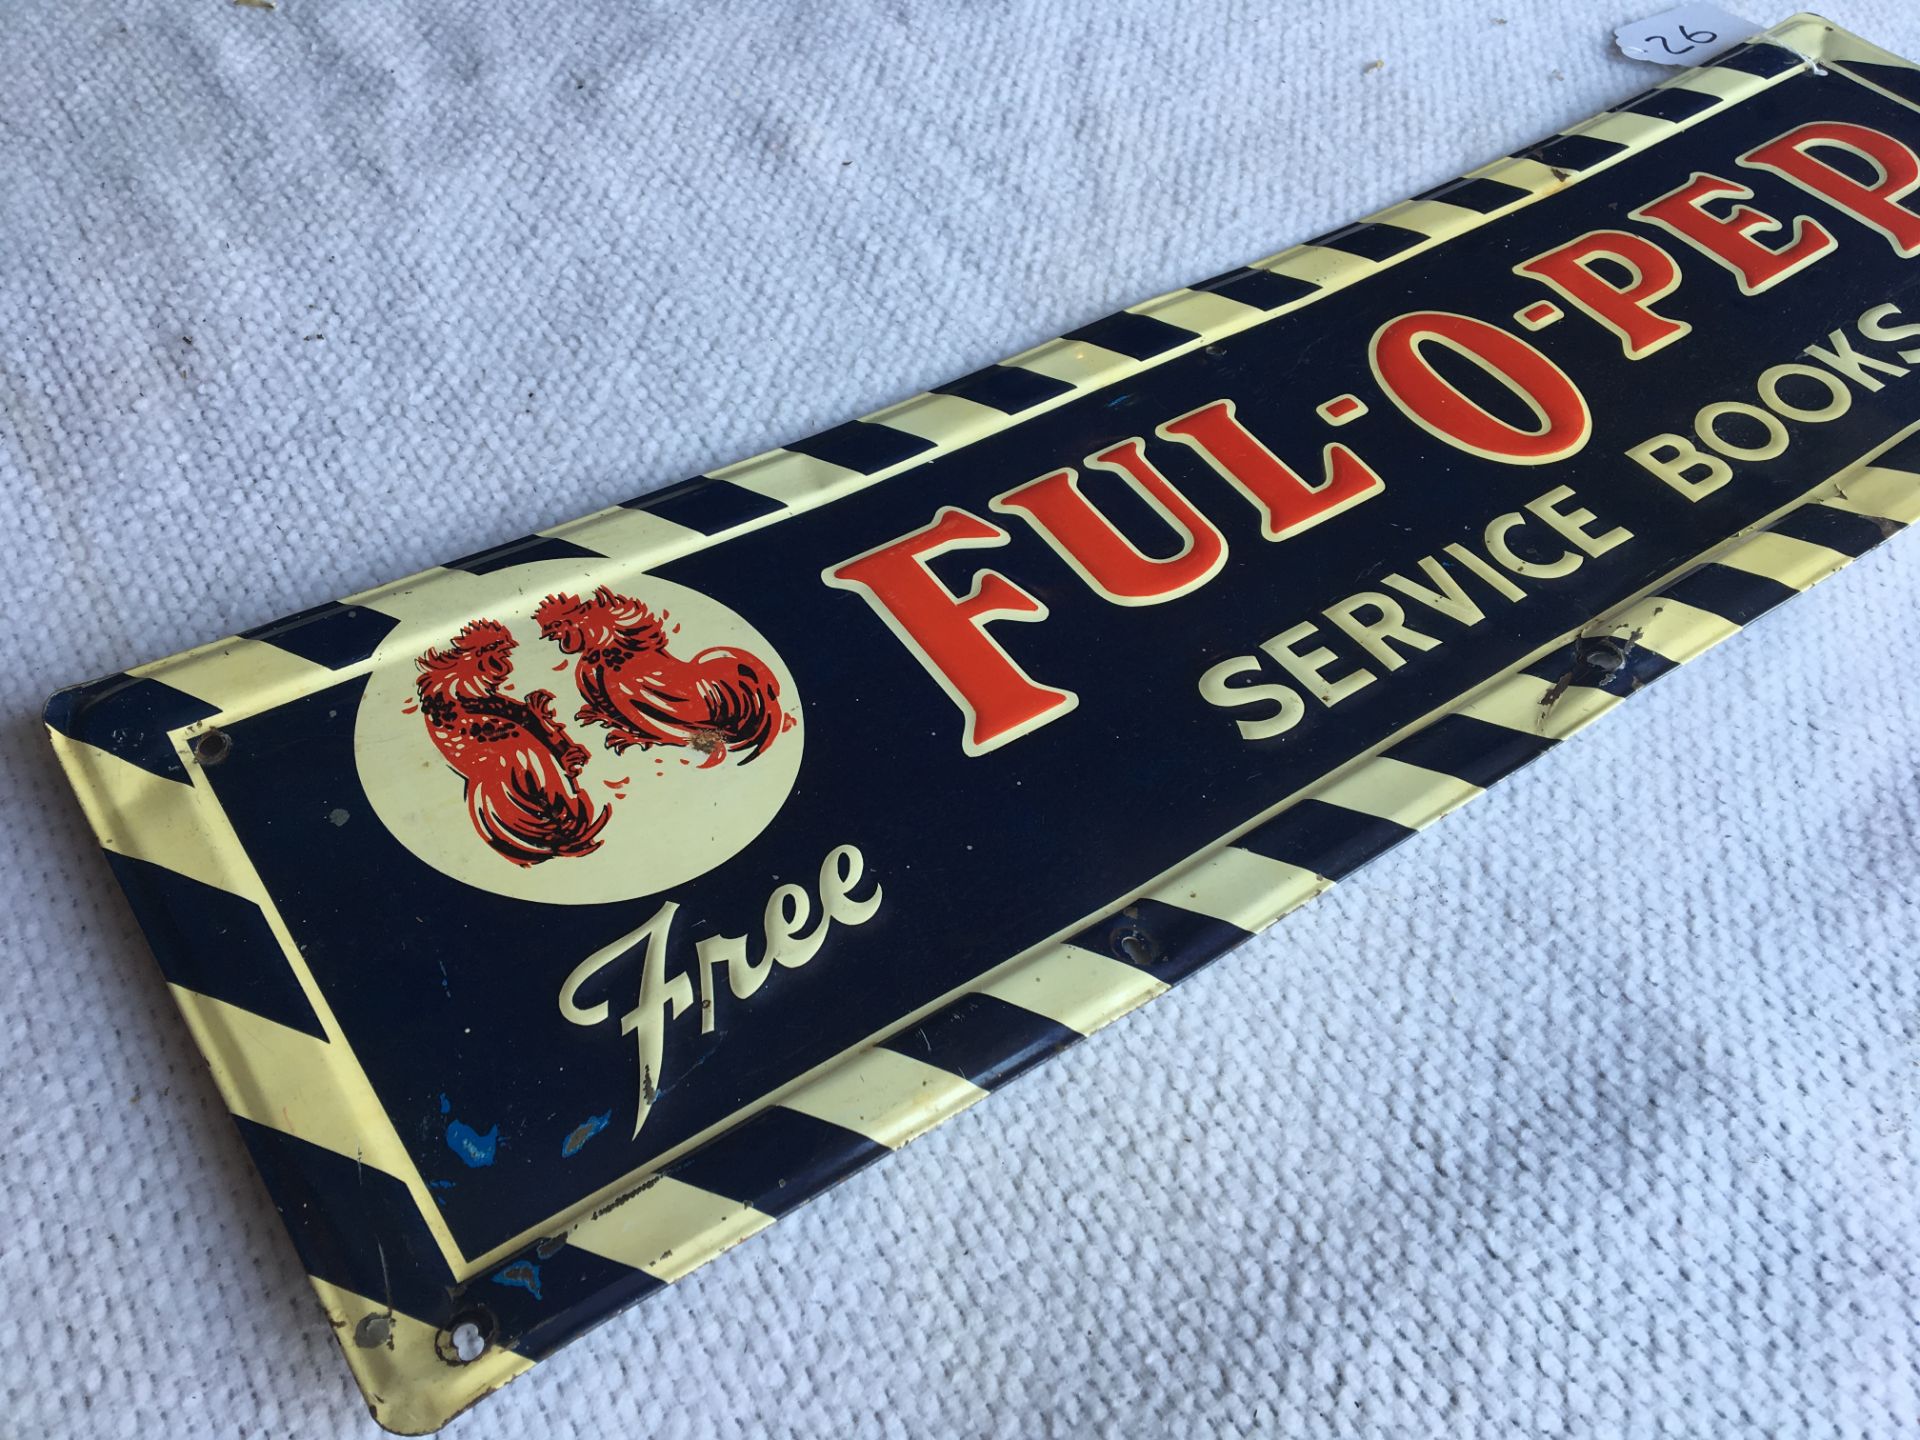 Ful-O-Pep Service Books, 8” x 27 ½”, Metal Sign - Image 2 of 2